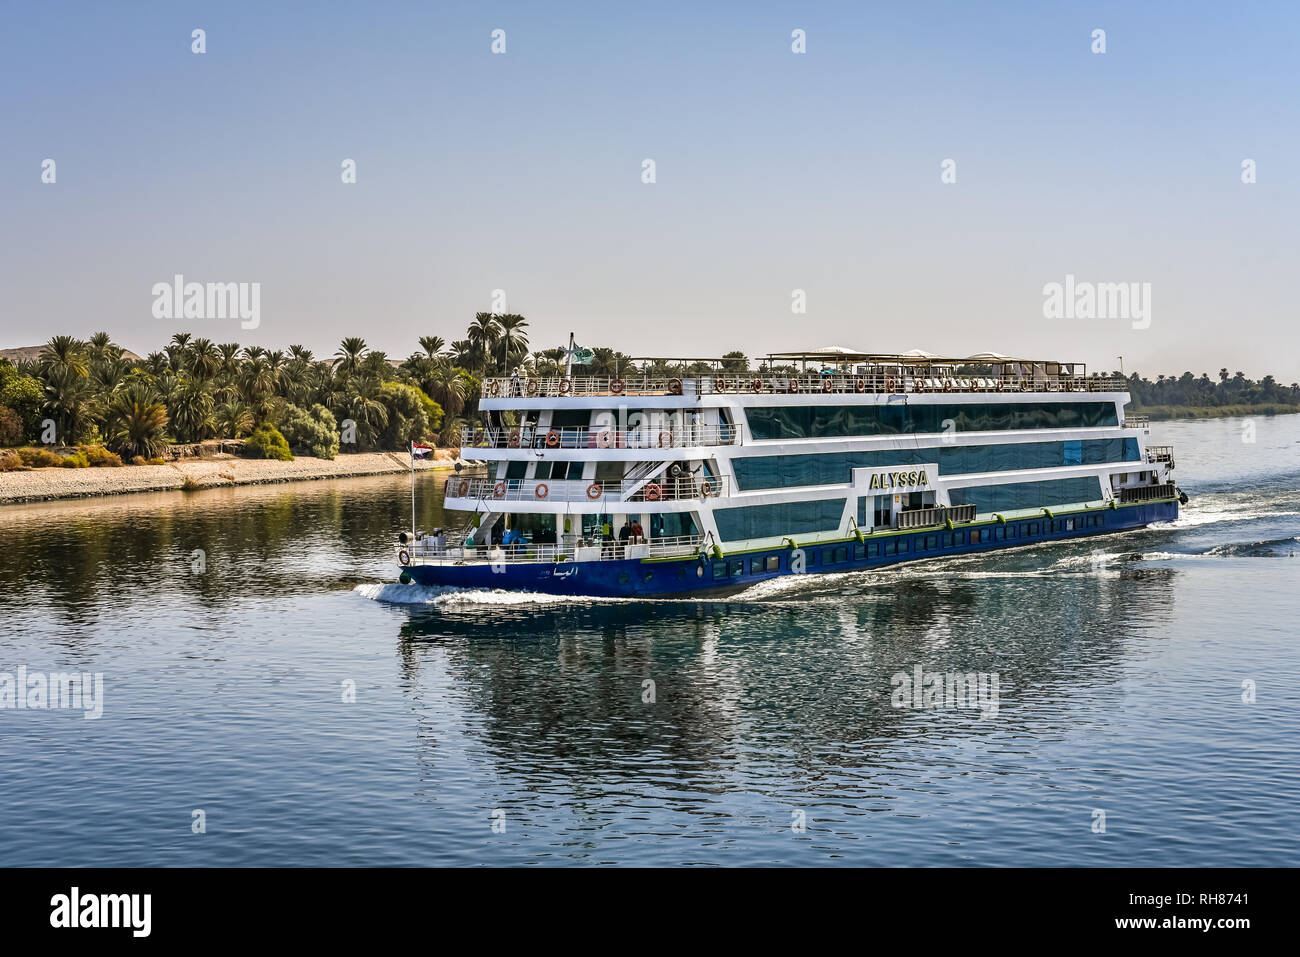 Blue crusing ship with four decks for turists, sailing on the river Nile, Nile, Egypt, October 23, 2018 Stock Photo